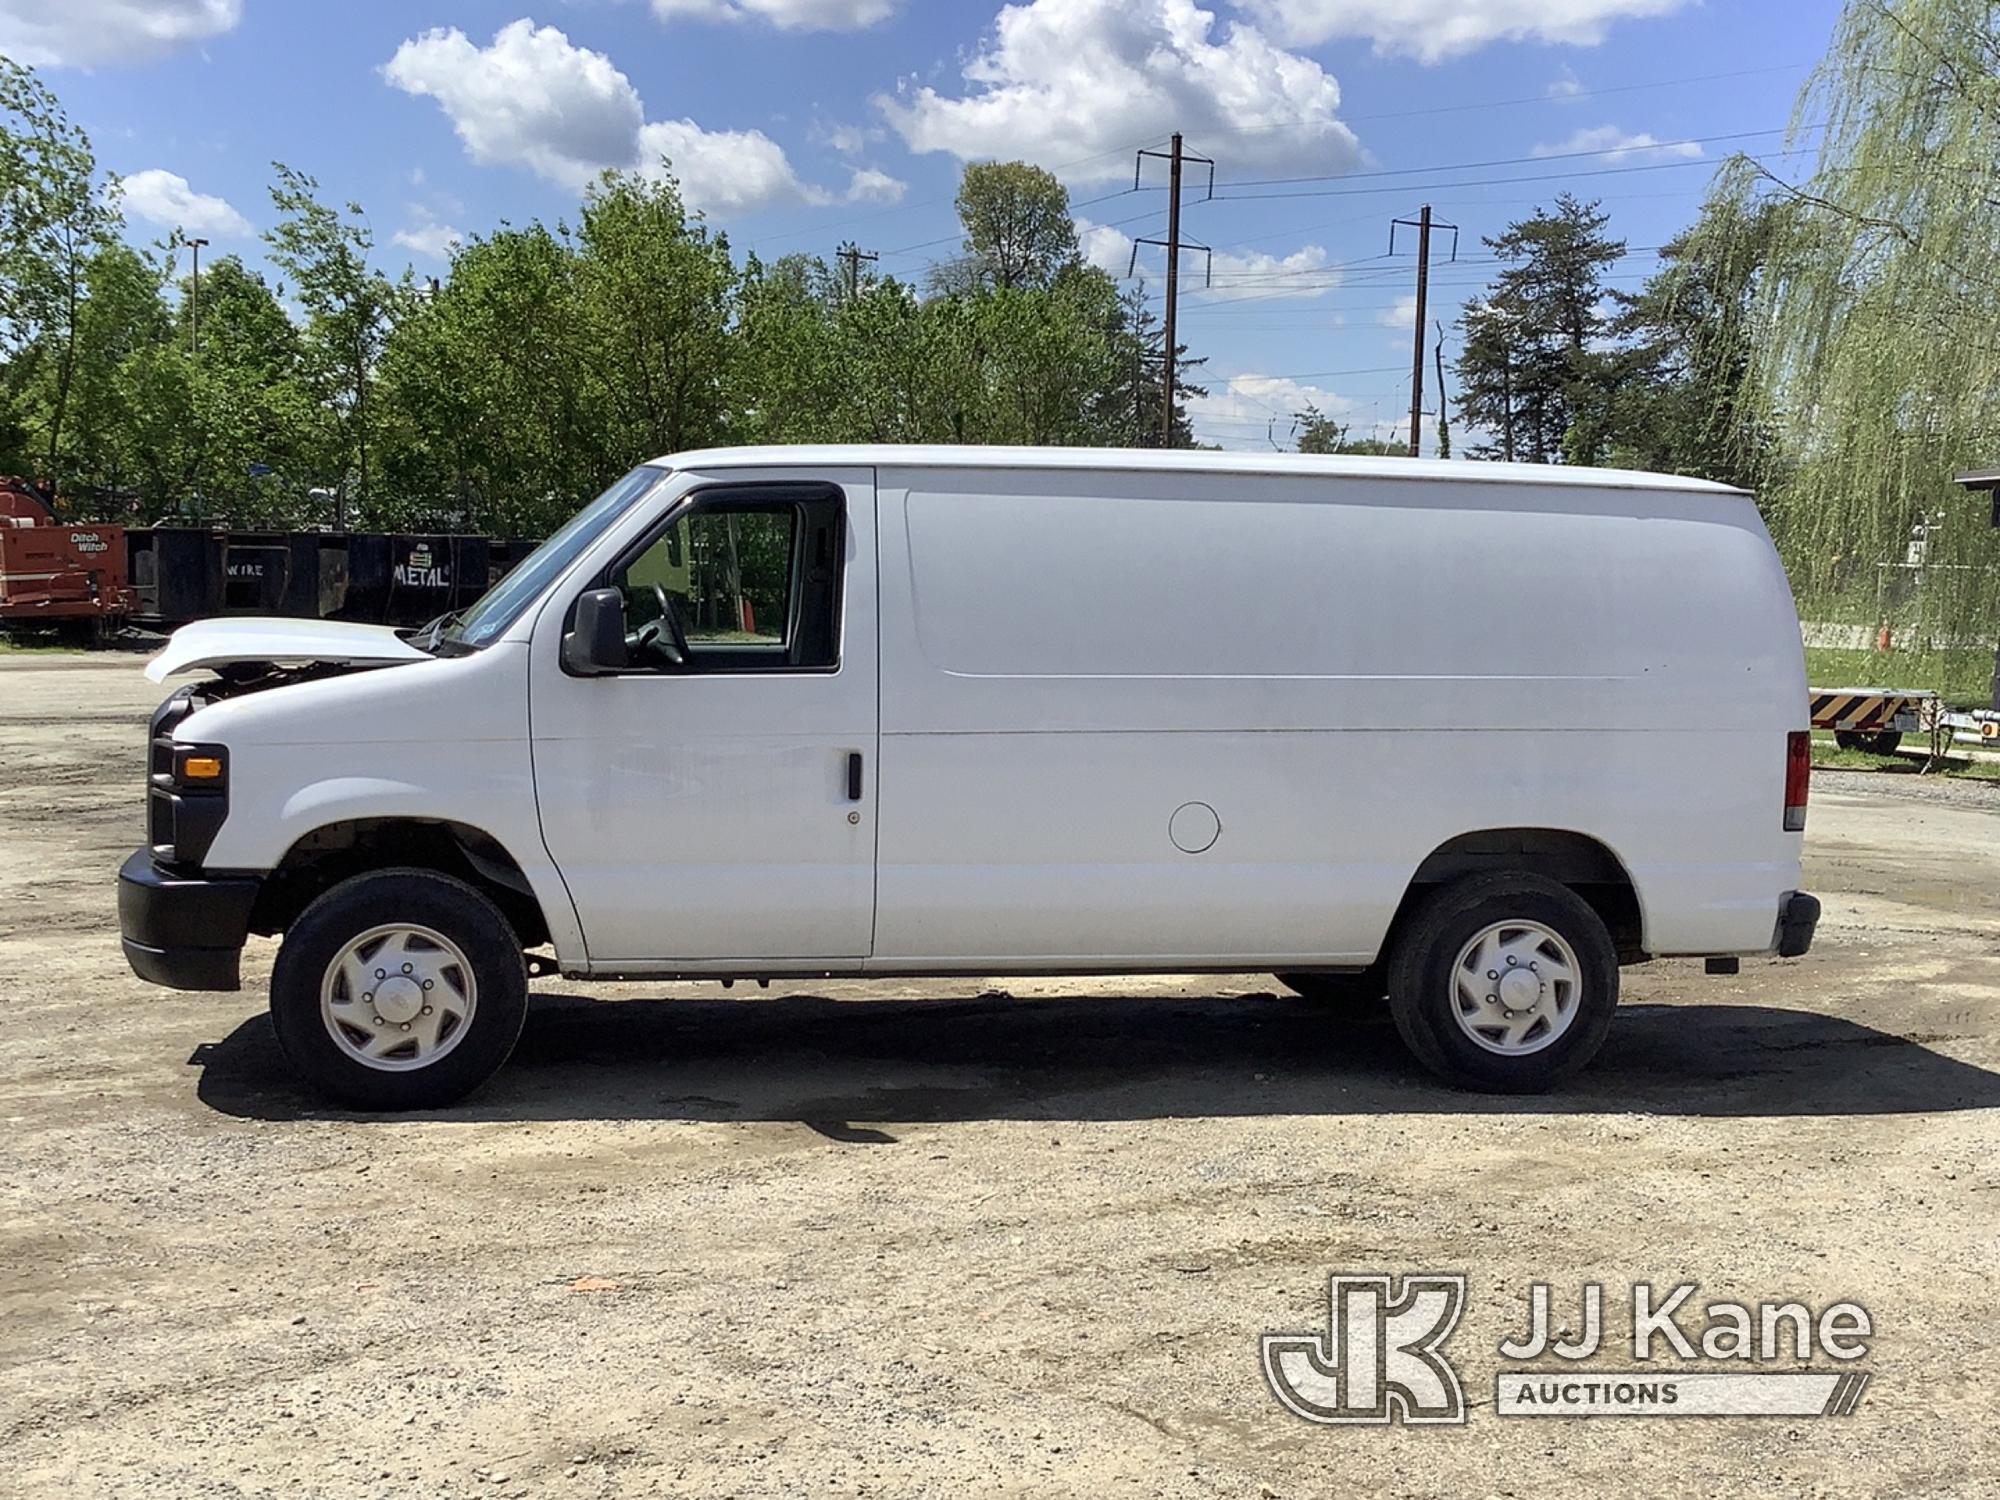 (Harmans, MD) 2008 Ford E150 Cargo Van Runs & Moves, Only Runs On Jump Pack, Rust & Body Damage